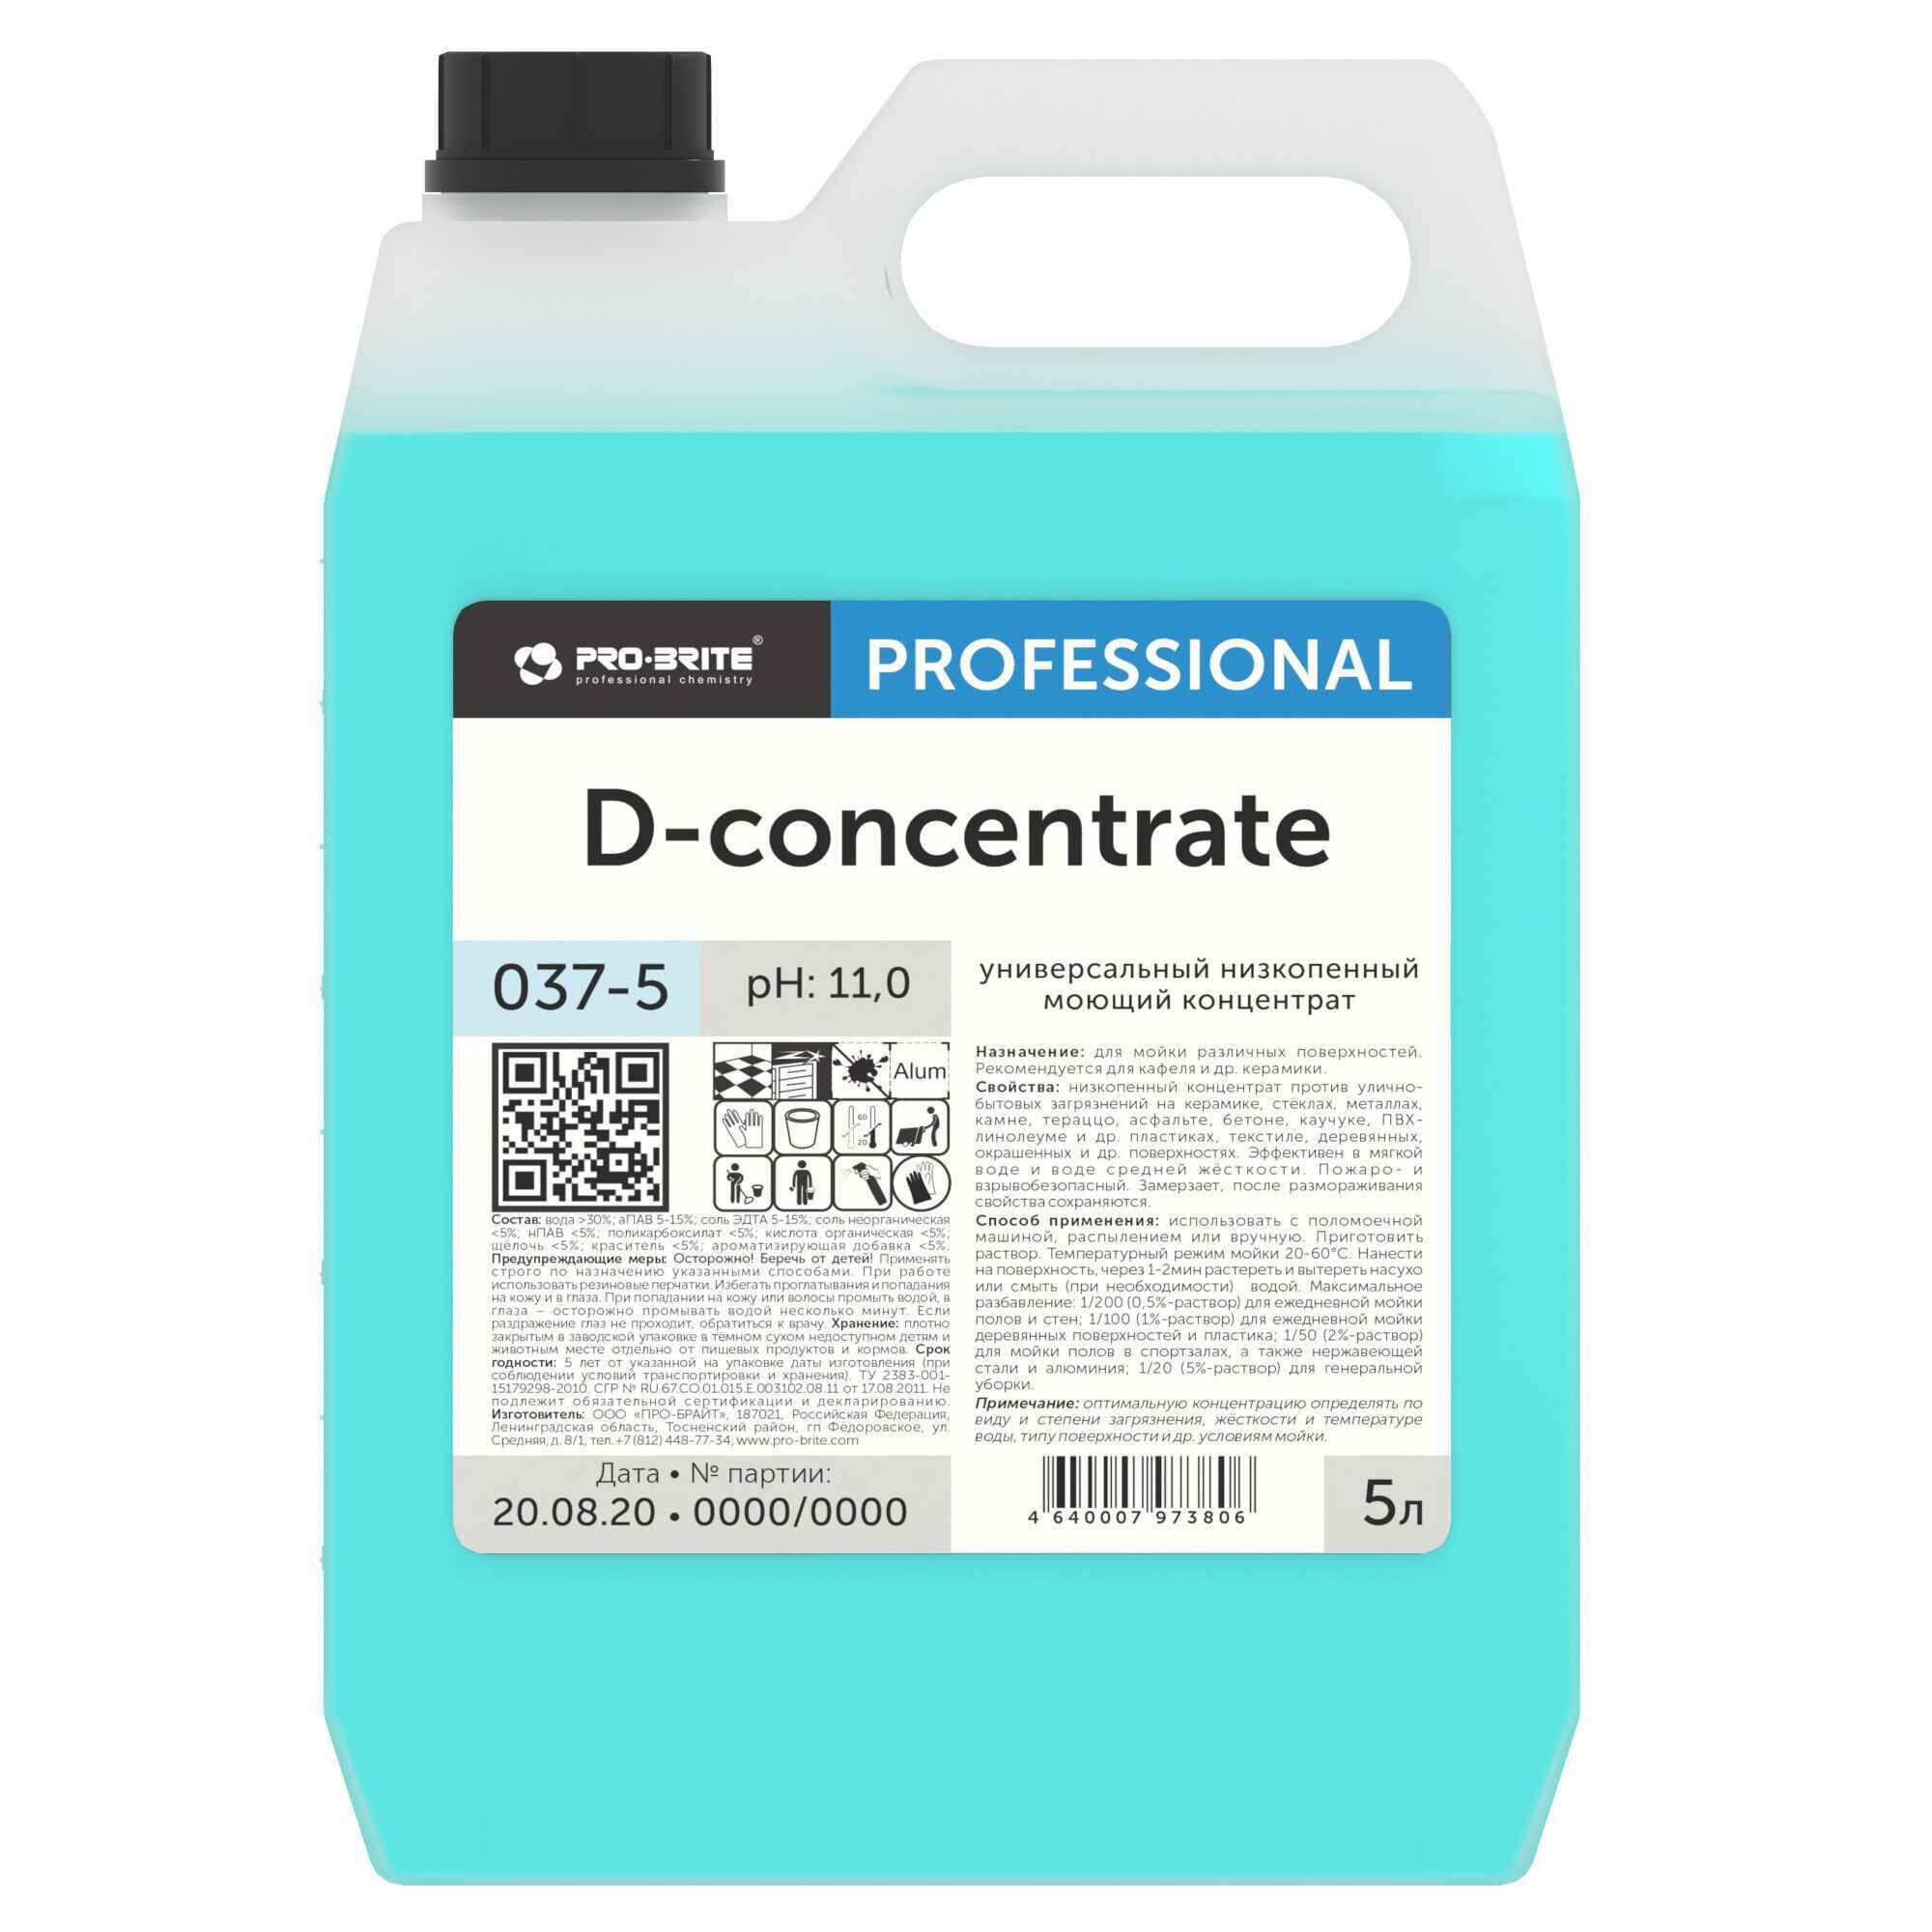 D-concentrate